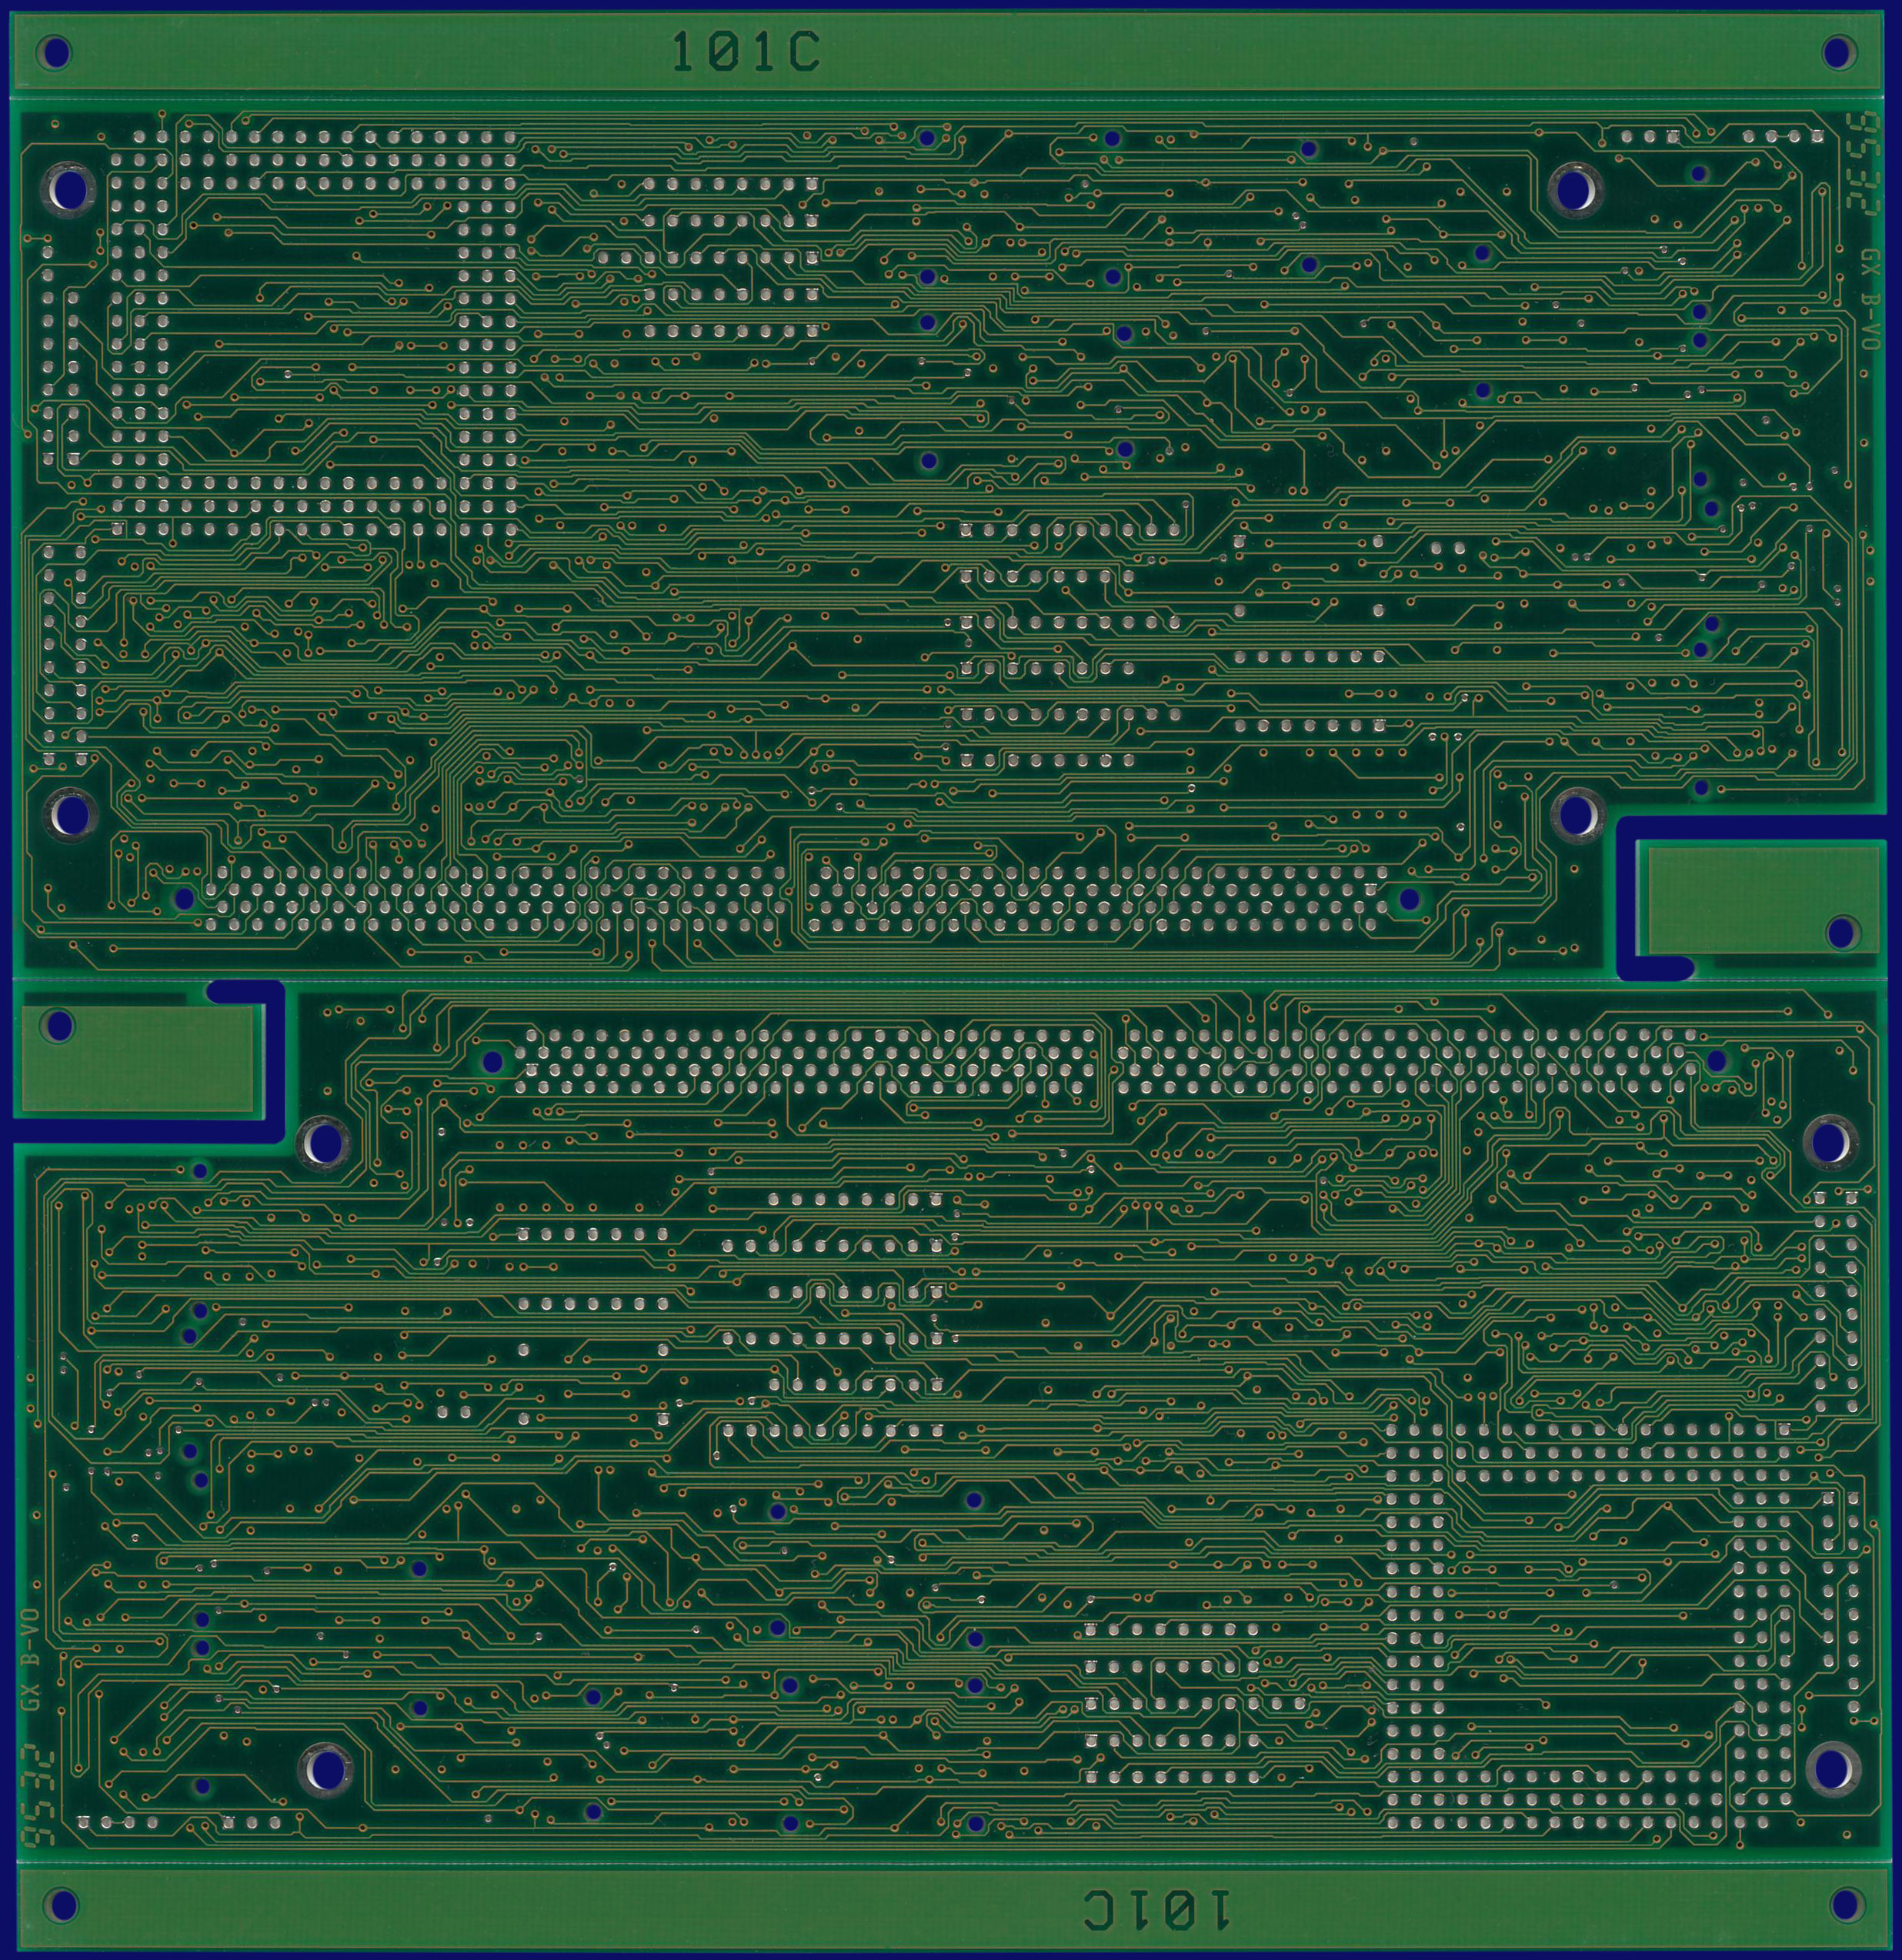 Commodore A3640 - blank PCB, back side